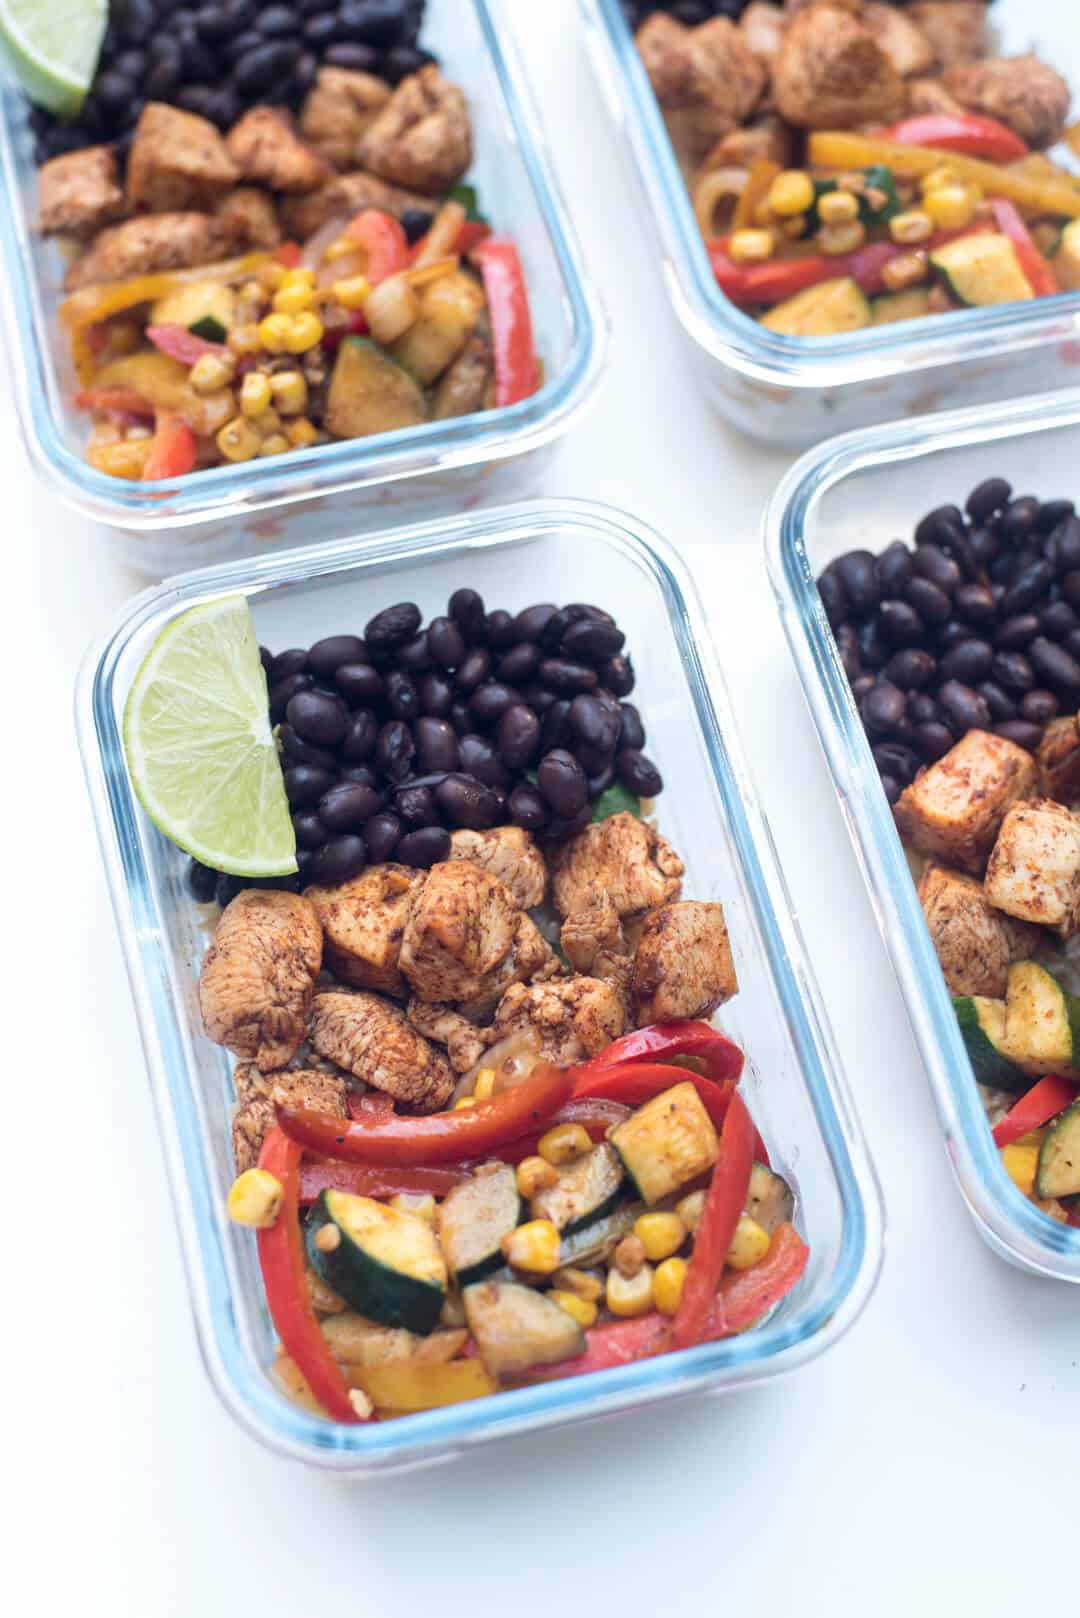 Chicken, peppers, and beans in meal prep containers.